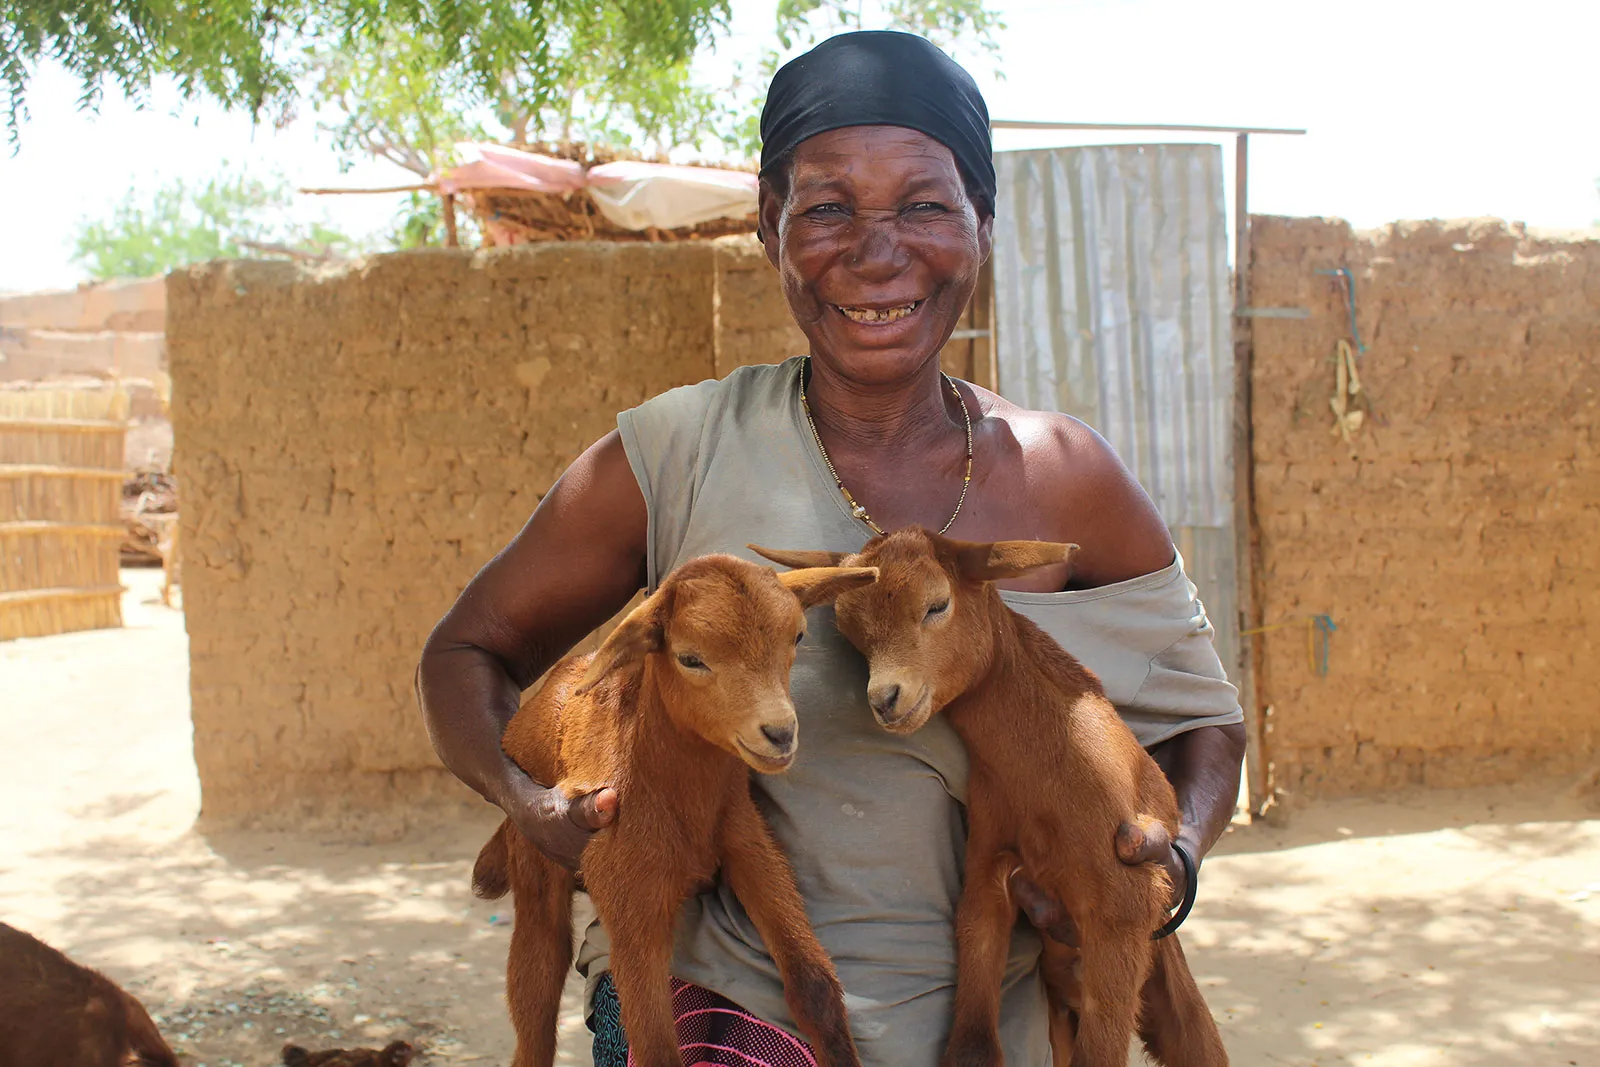 A woman smiles while holding two brown baby goats.